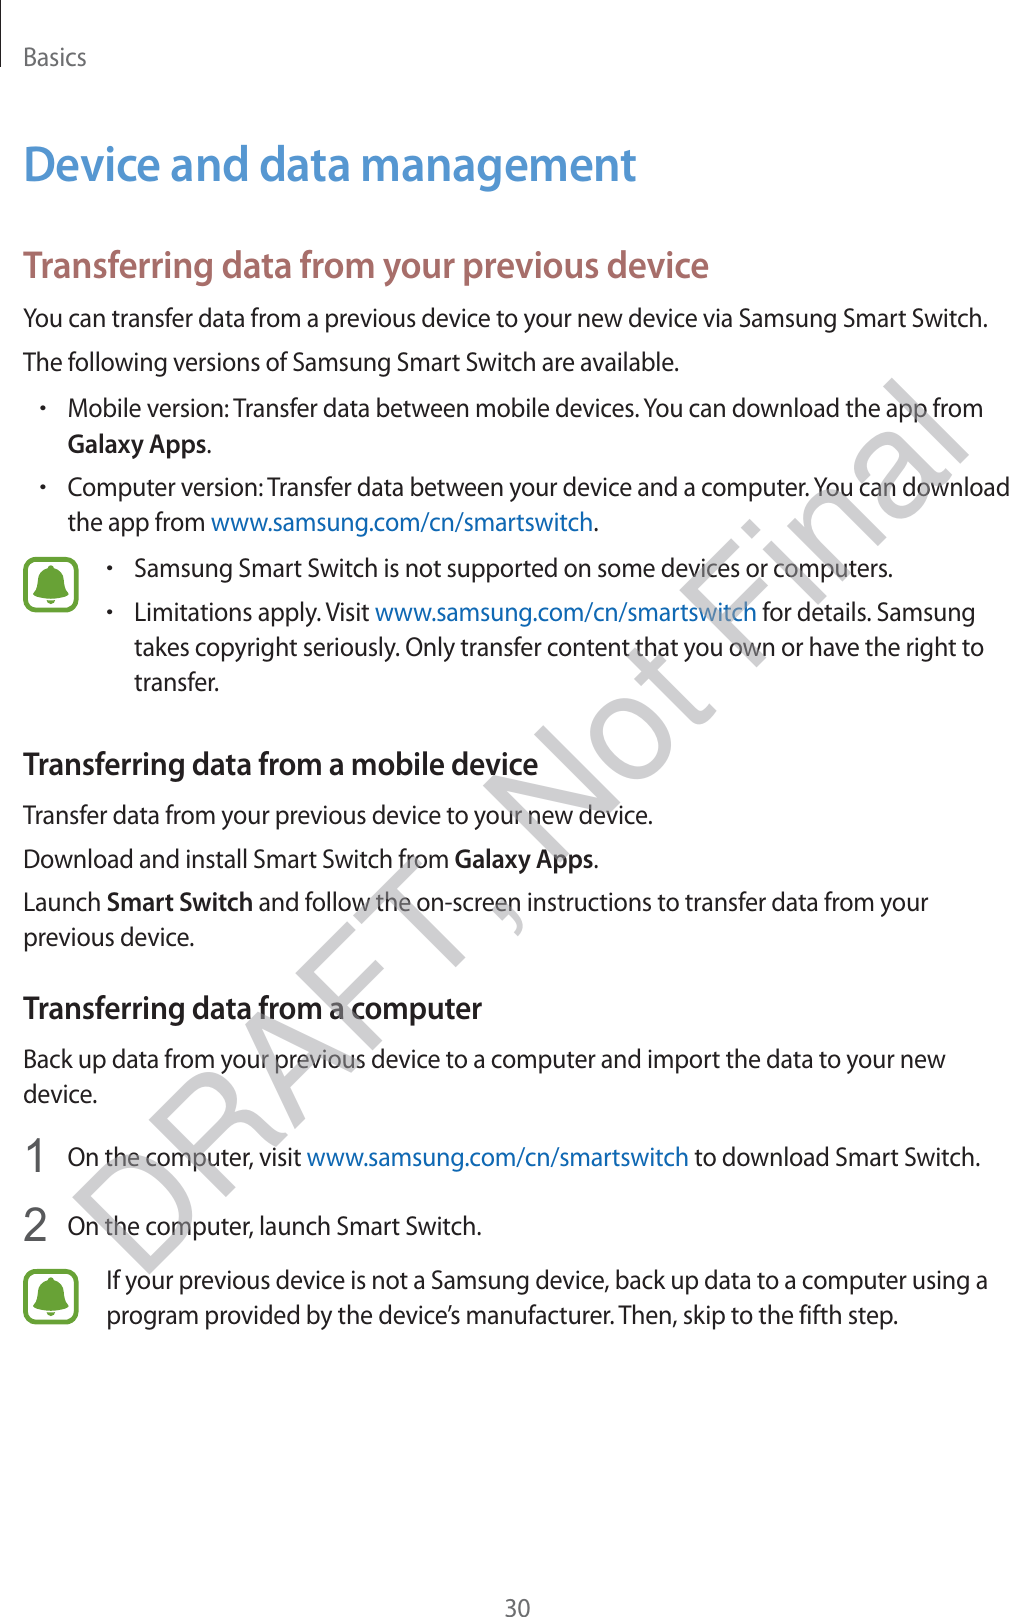 Basics30Device and data managementTransferring data from your previous deviceYou can transfer data from a previous device to your new device via Samsung Smart Switch.The following versions of Samsung Smart Switch are available.rMobile version: Transfer data between mobile devices. You can download the app from Galaxy Apps.rComputer version: Transfer data between your device and a computer. You can download the app from www.samsung.com/cn/smartswitch.rSamsung Smart Switch is not supported on some devices or computers.rLimitations apply. Visit www.samsung.com/cn/smartswitch for details. Samsung takes copyright seriously. Only transfer content that you own or have the right to transfer.Transferring data from a mobile deviceTransfer data from your previous device to your new device.Download and install Smart Switch from Galaxy Apps.Launch Smart Switch and follow the on-screen instructions to transfer data from your previous device.Transferring data from a computerBack up data from your previous device to a computer and import the data to your new device.1 On the computer, visit www.samsung.com/cn/smartswitch to download Smart Switch.2 On the computer, launch Smart Switch.If your previous device is not a Samsung device, back up data to a computer using a program provided by the device’s manufacturer. Then, skip to the fifth step.DRAFT, Not Final